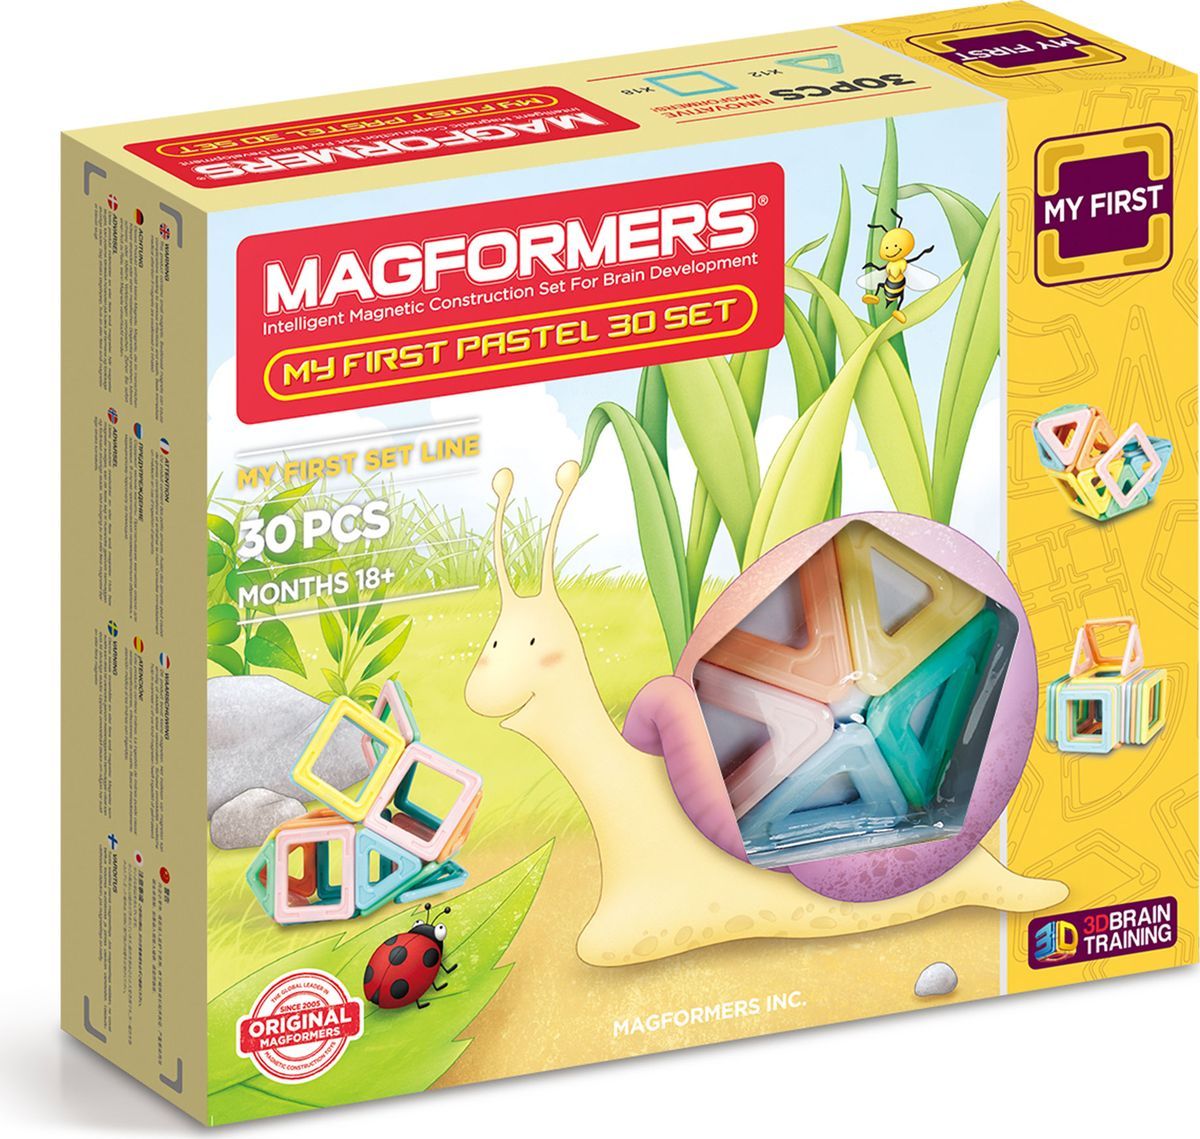 Magformers   My First Pastel 30 Set